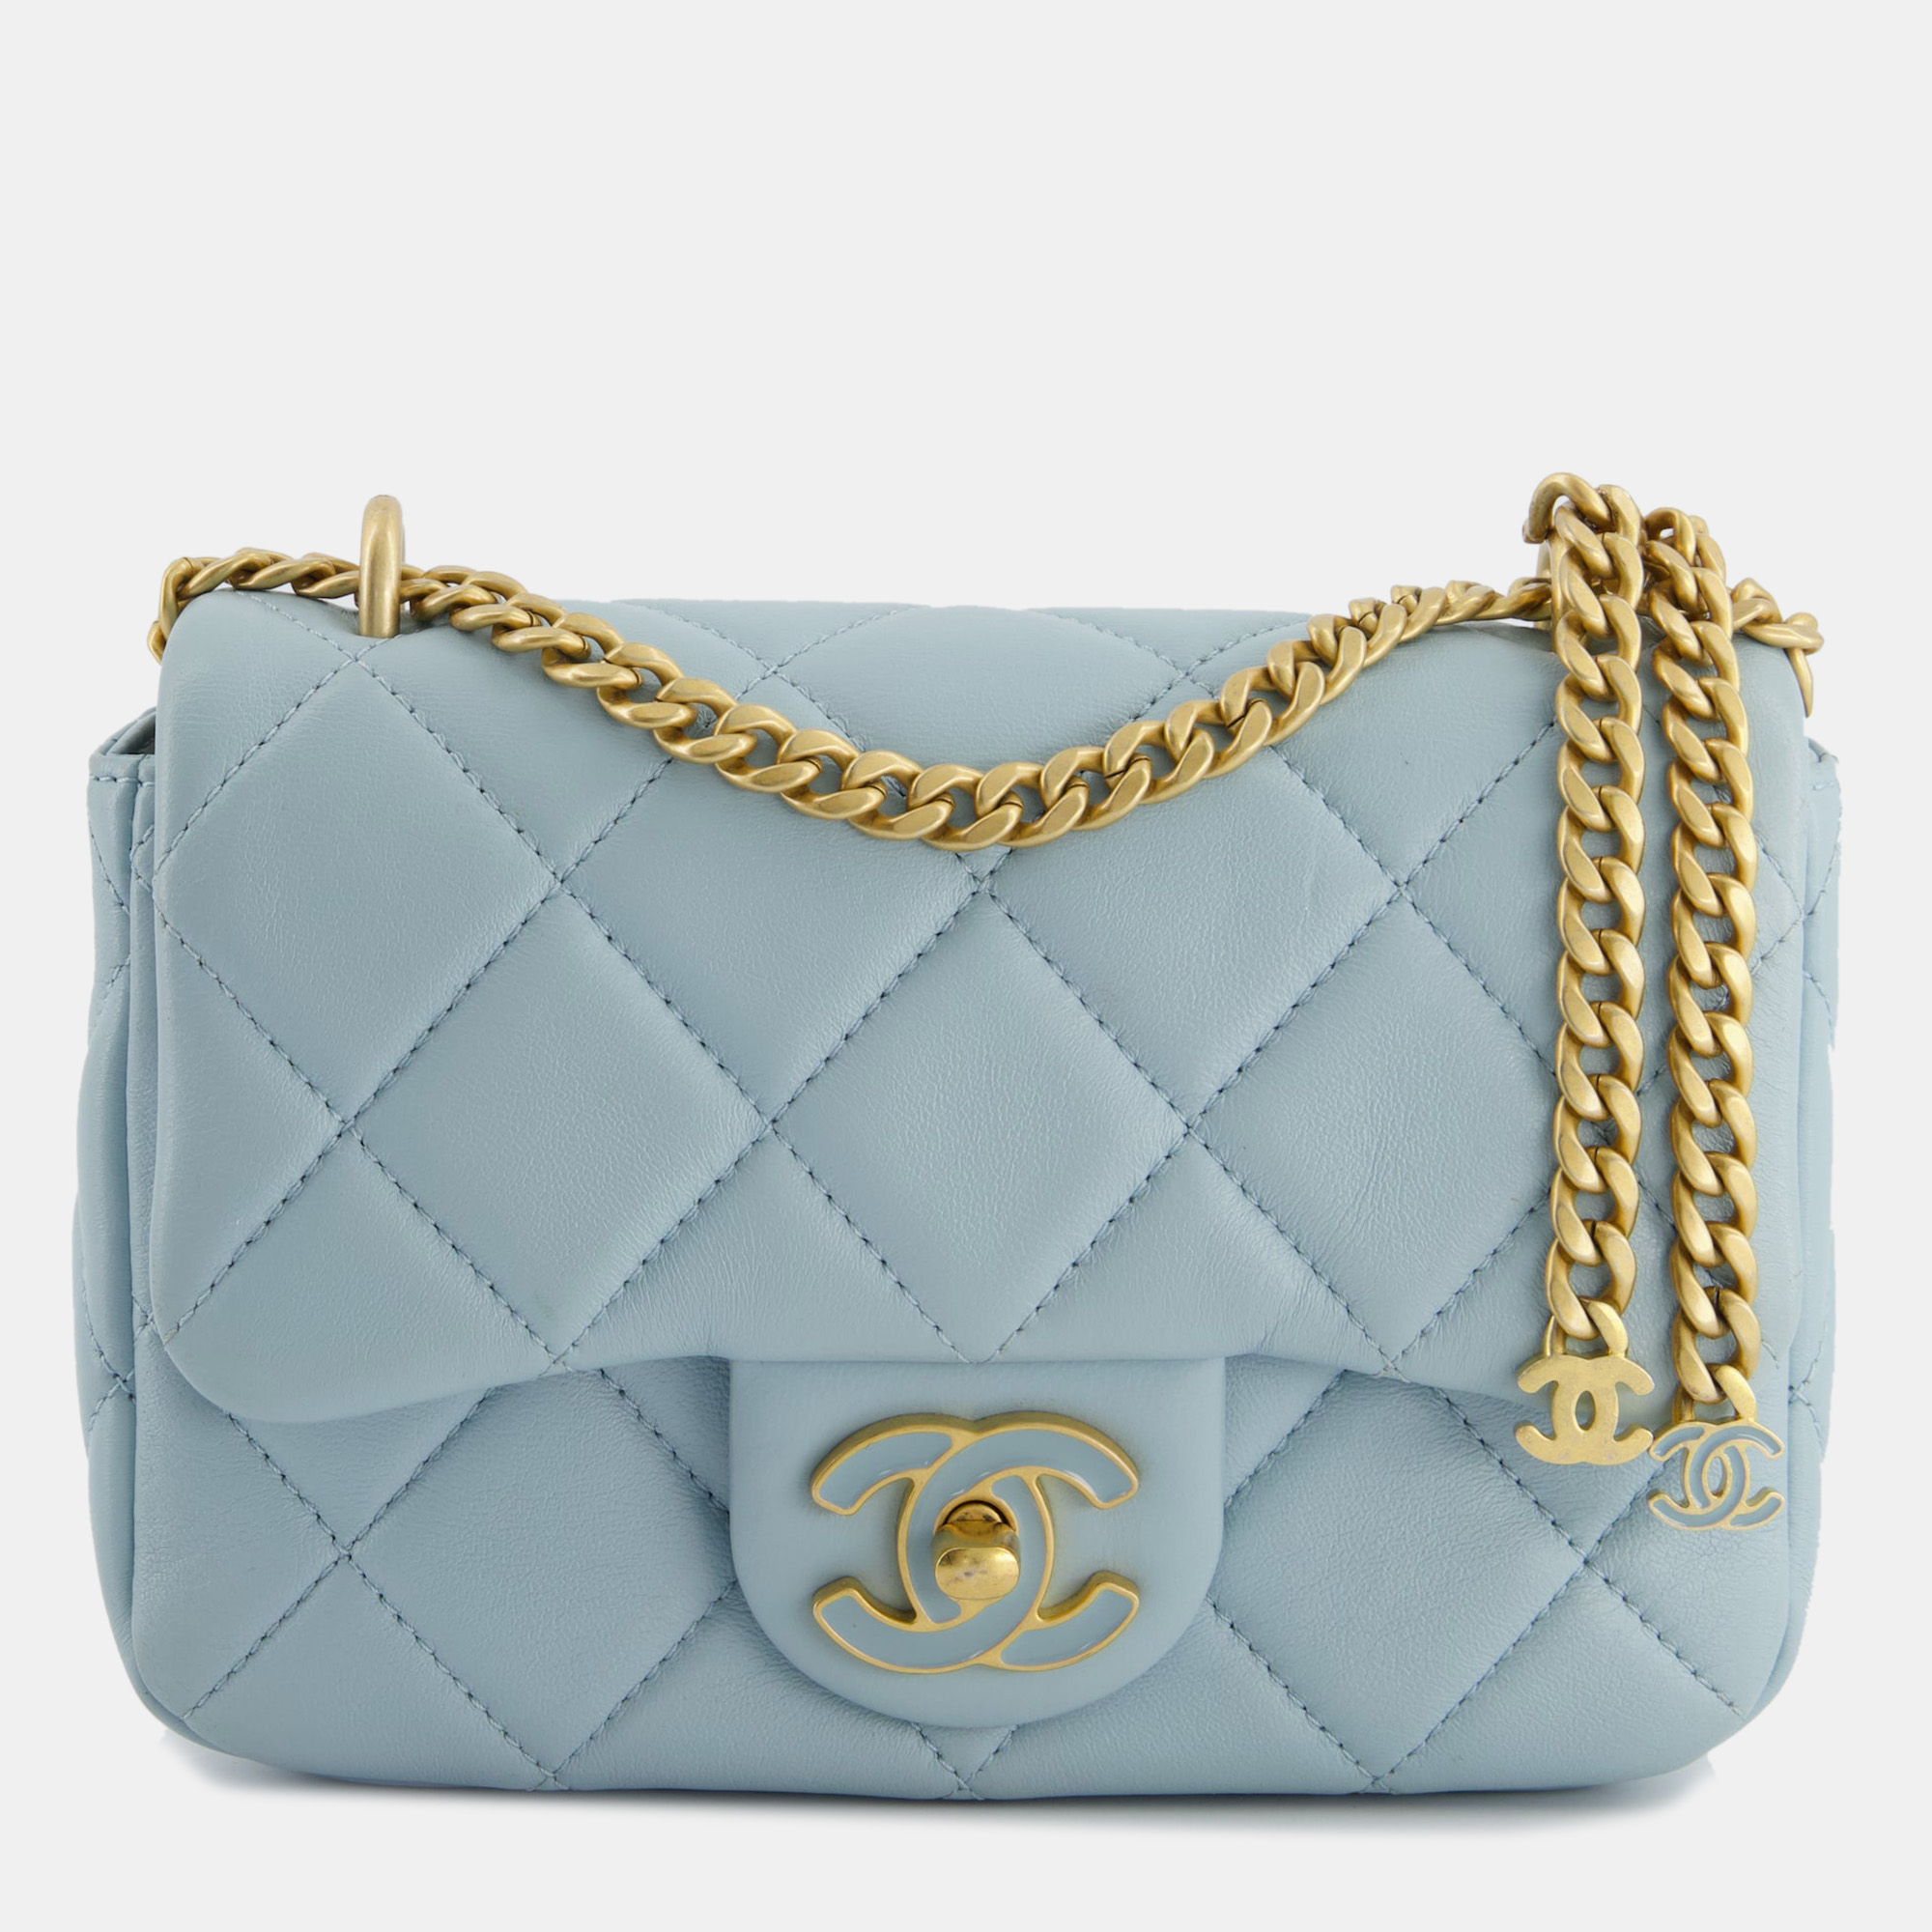 Chanel powder blue mini square flap bag with gold hardware